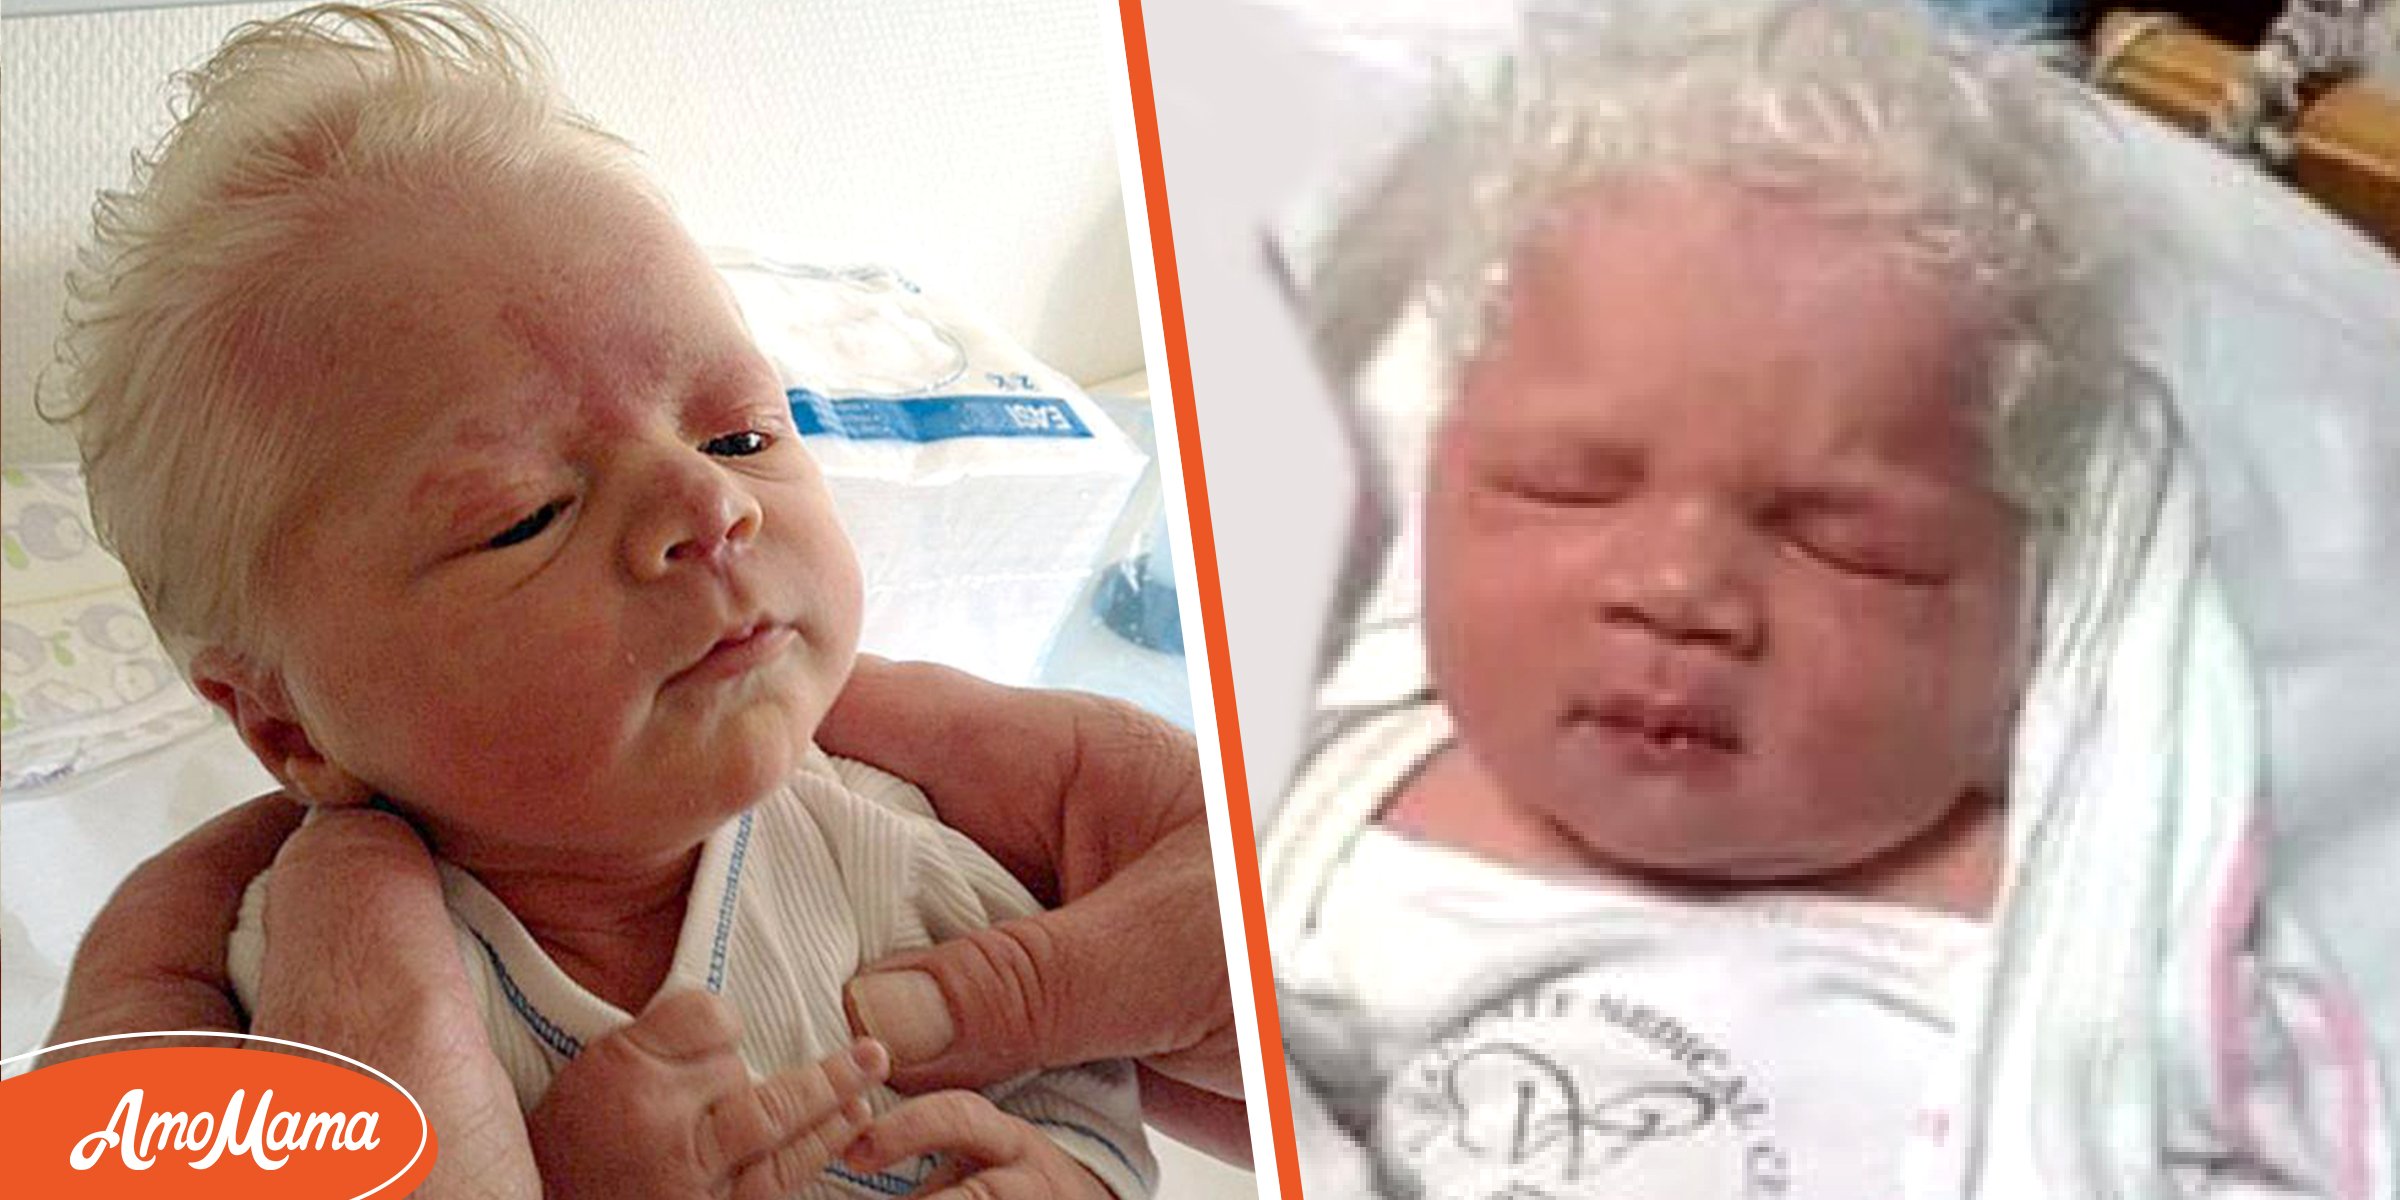 Baby Boy Born with Full Head of White Hair: 'God Bless You Little One'